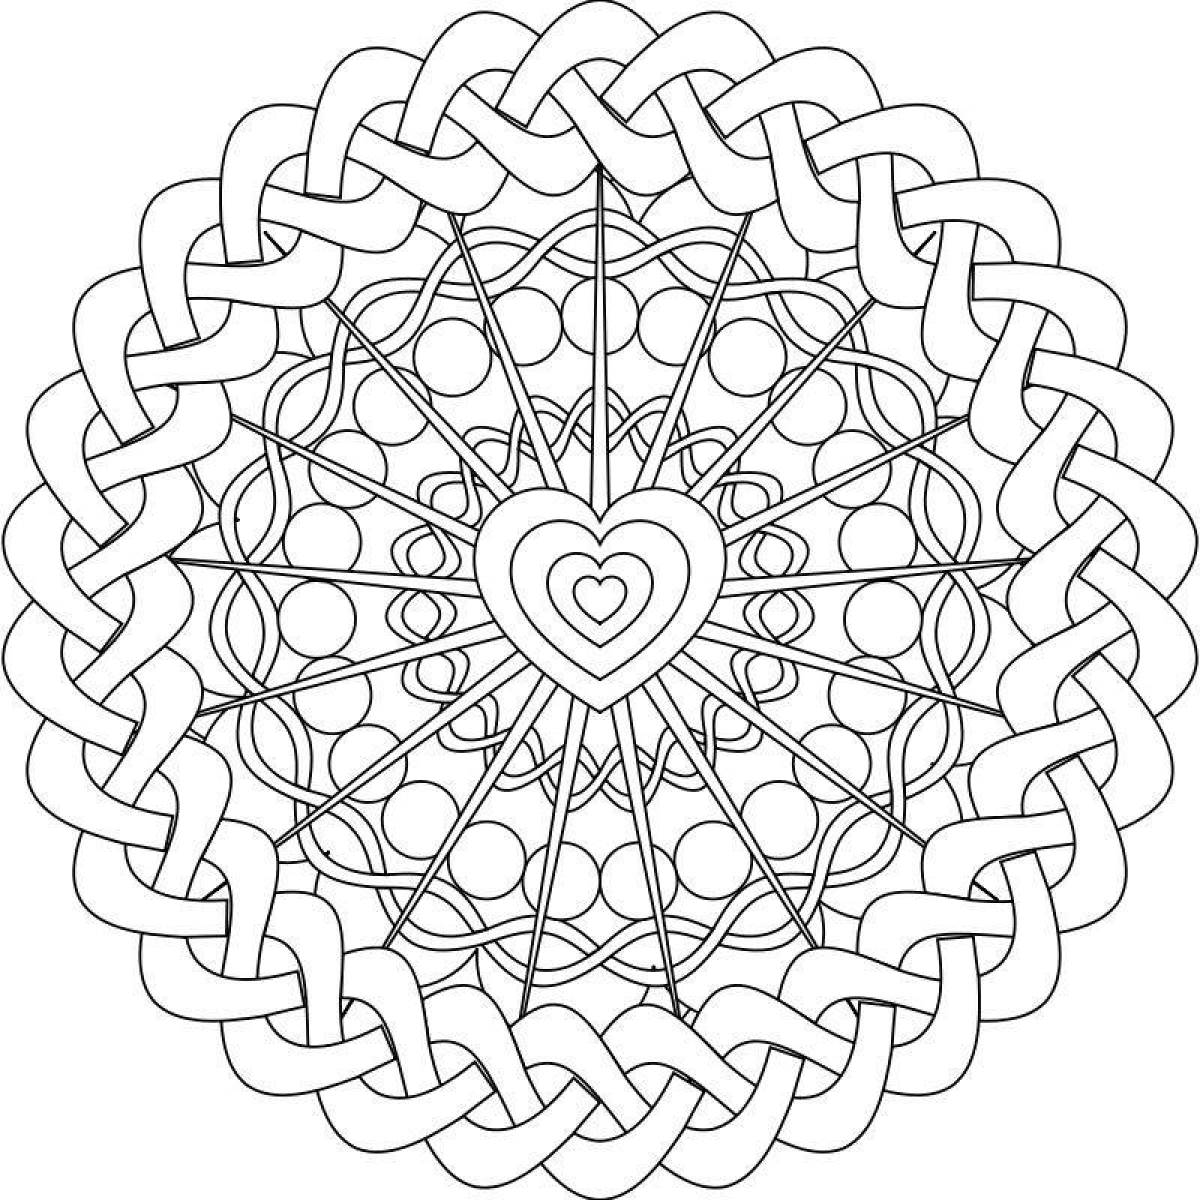 Royal mandala coloring pages with meaning